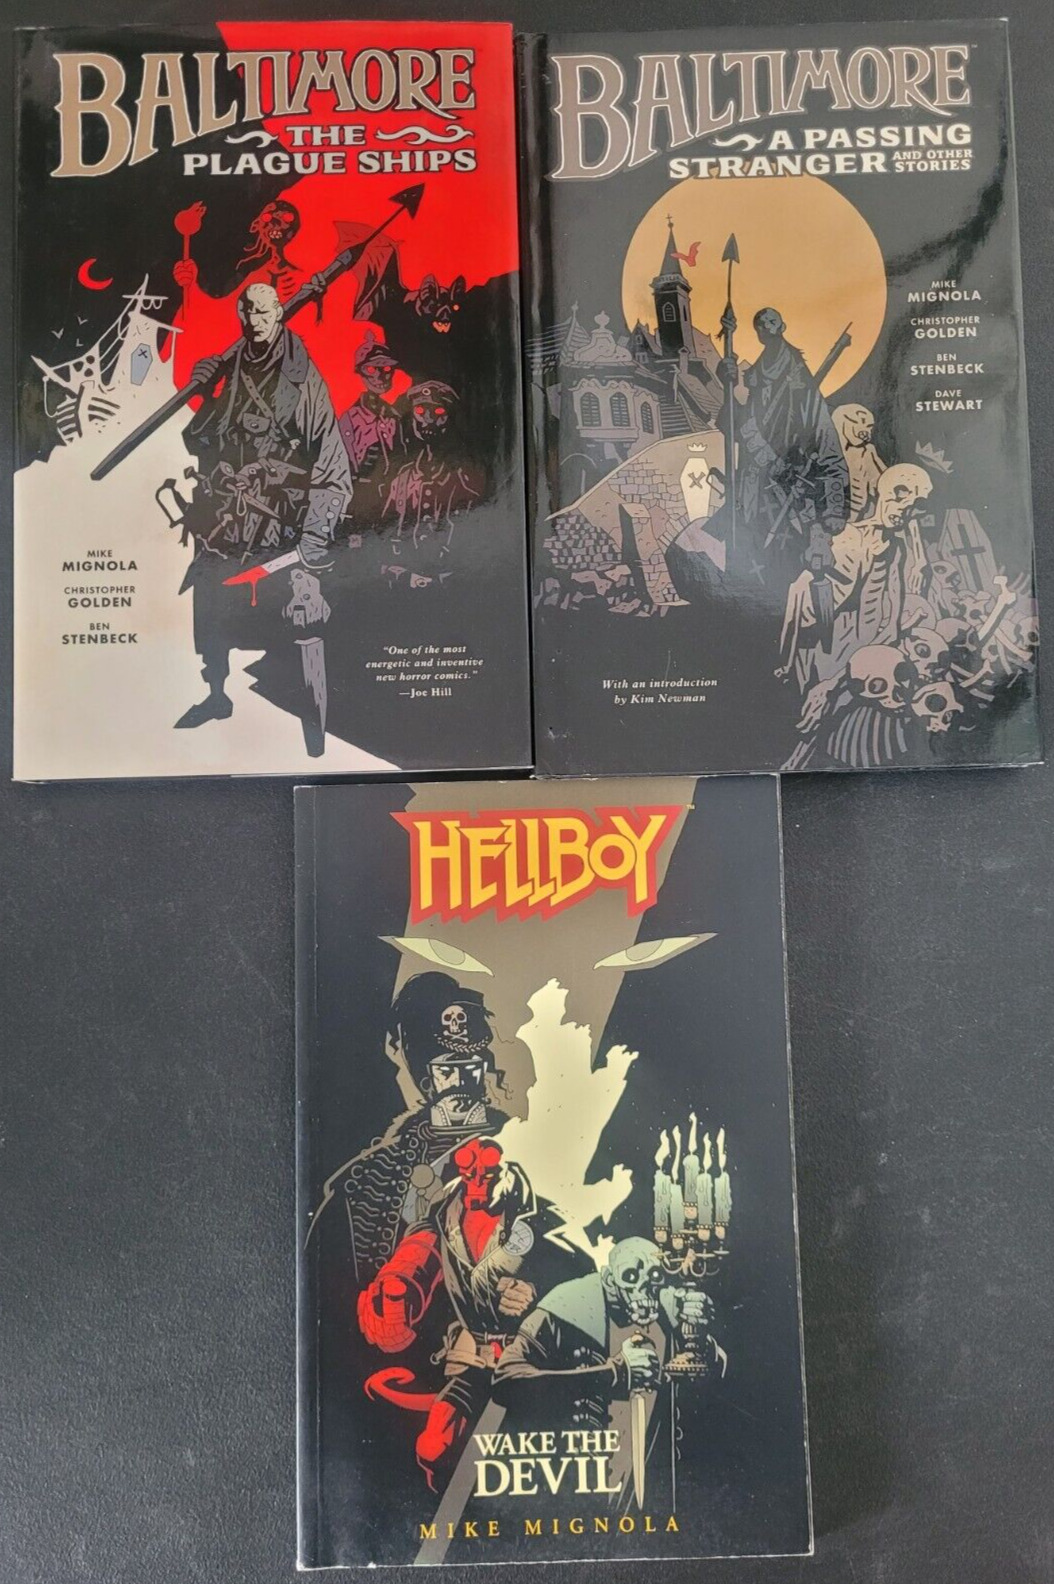 HELLBOY TPB / BALTIMORE HARDCOVERS SET OF 3 COLLECTIONS DARK HORSE MIKE MIGNOLA